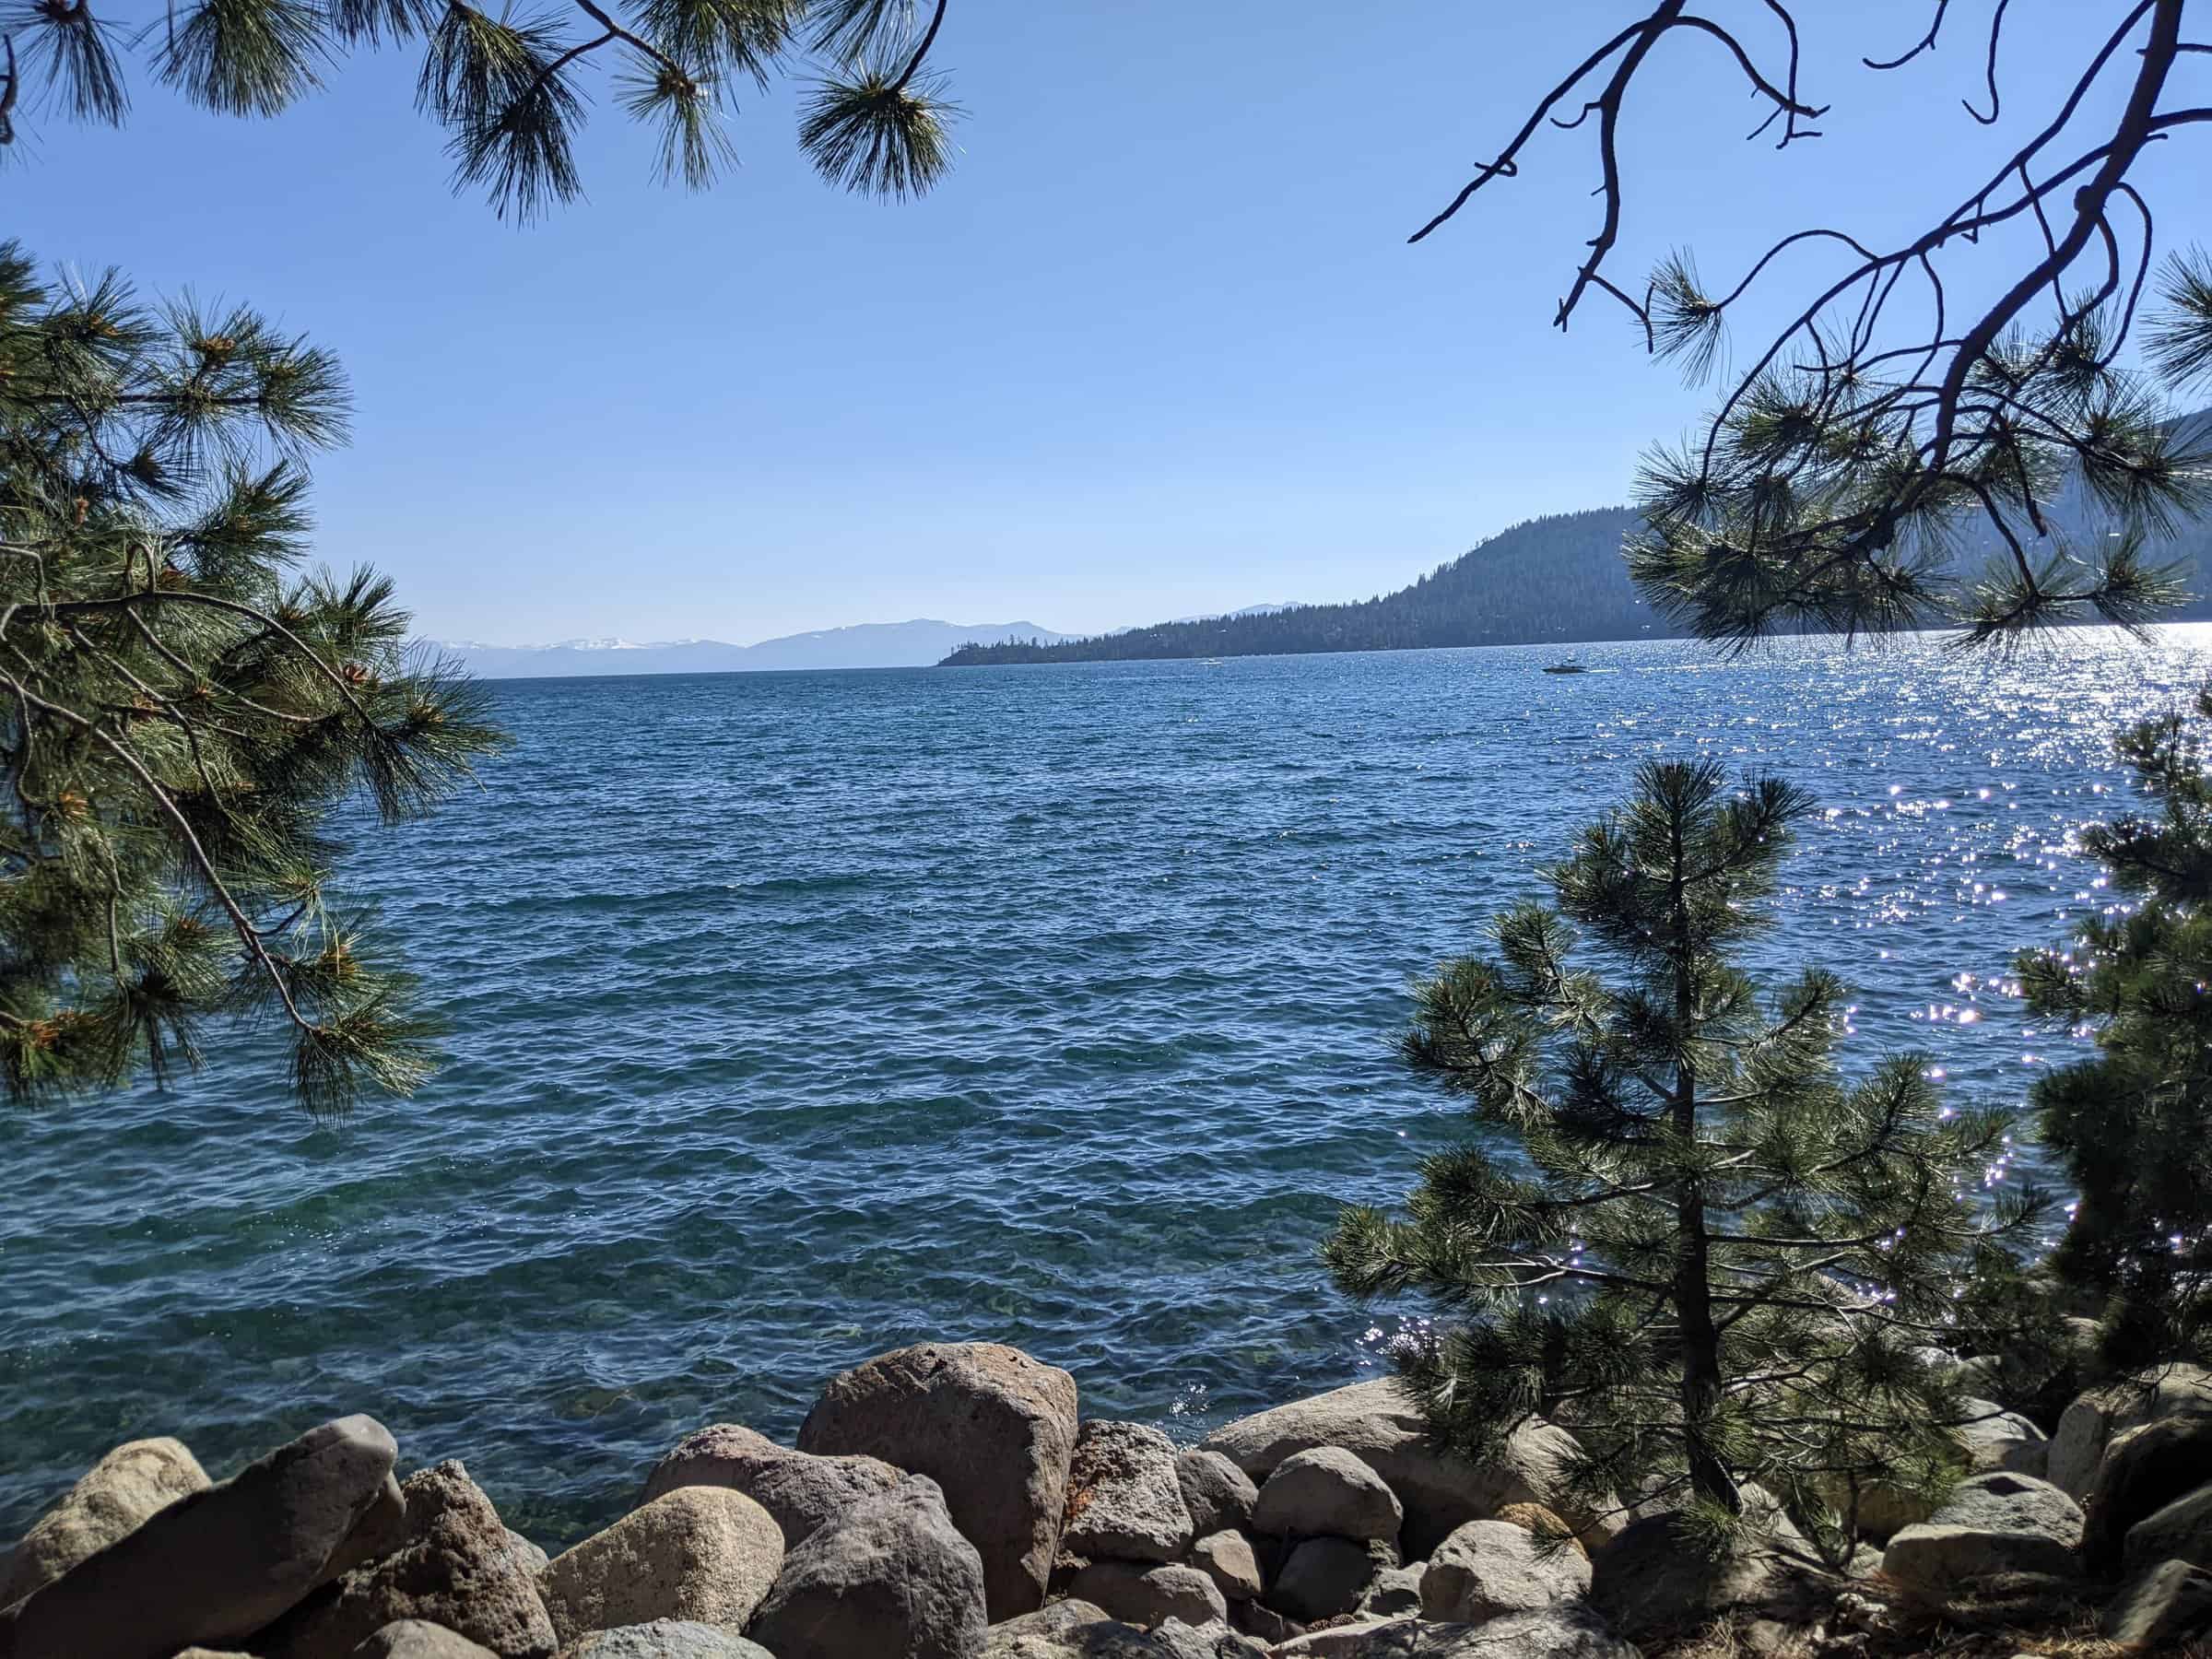 A view through pine branches to the sparkling blue waters of Lake Tahoe, with sunlit ripples and a mountainous backdrop under a clear sky